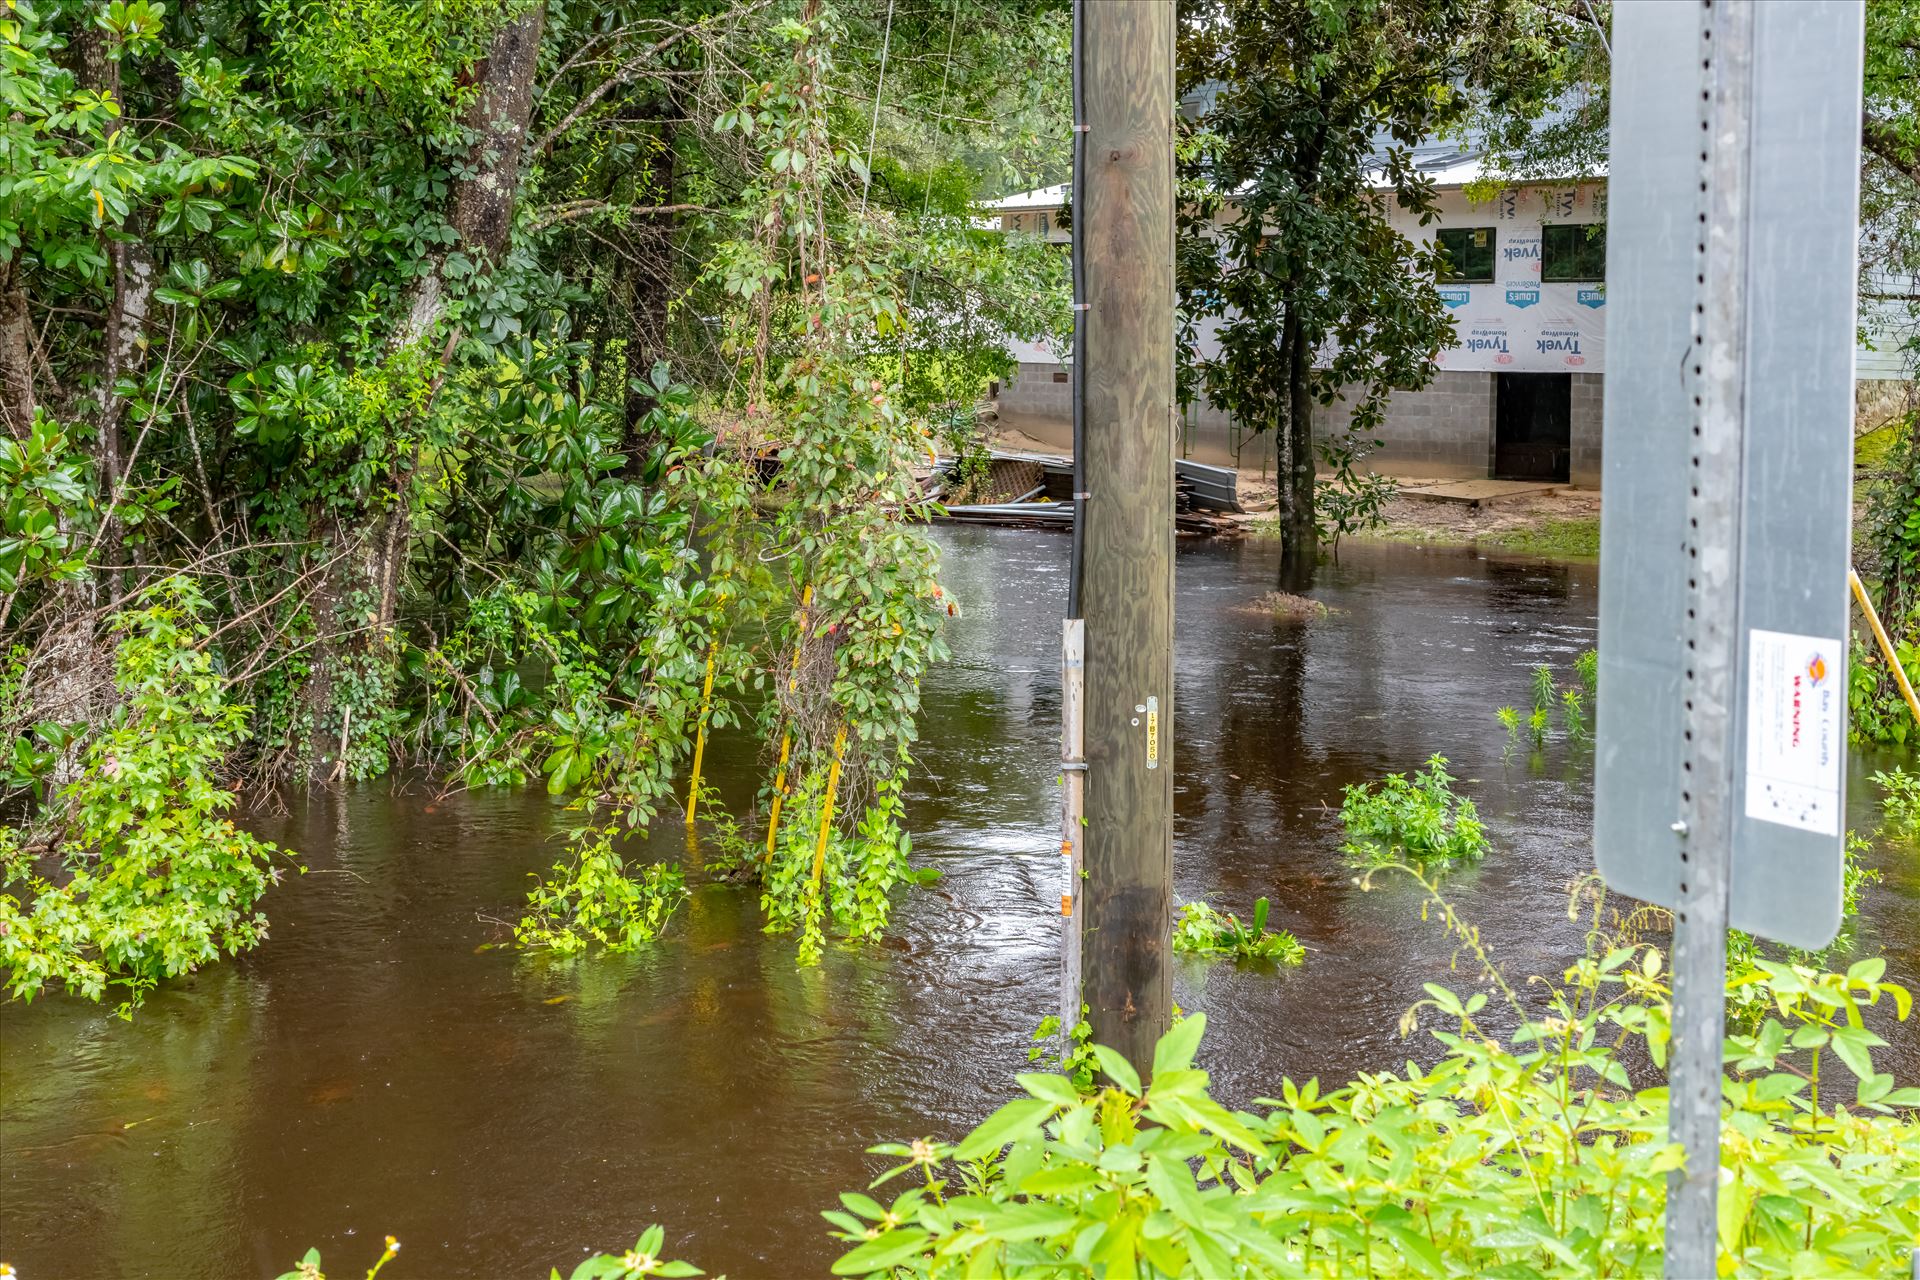 bear creek out of bank 3 August 02, 2018.jpg August 02, 2018 heavy rains flooded many parts of Bay County, Florida. This photo is in the Bear Creek area. by Terry Kelly Photography